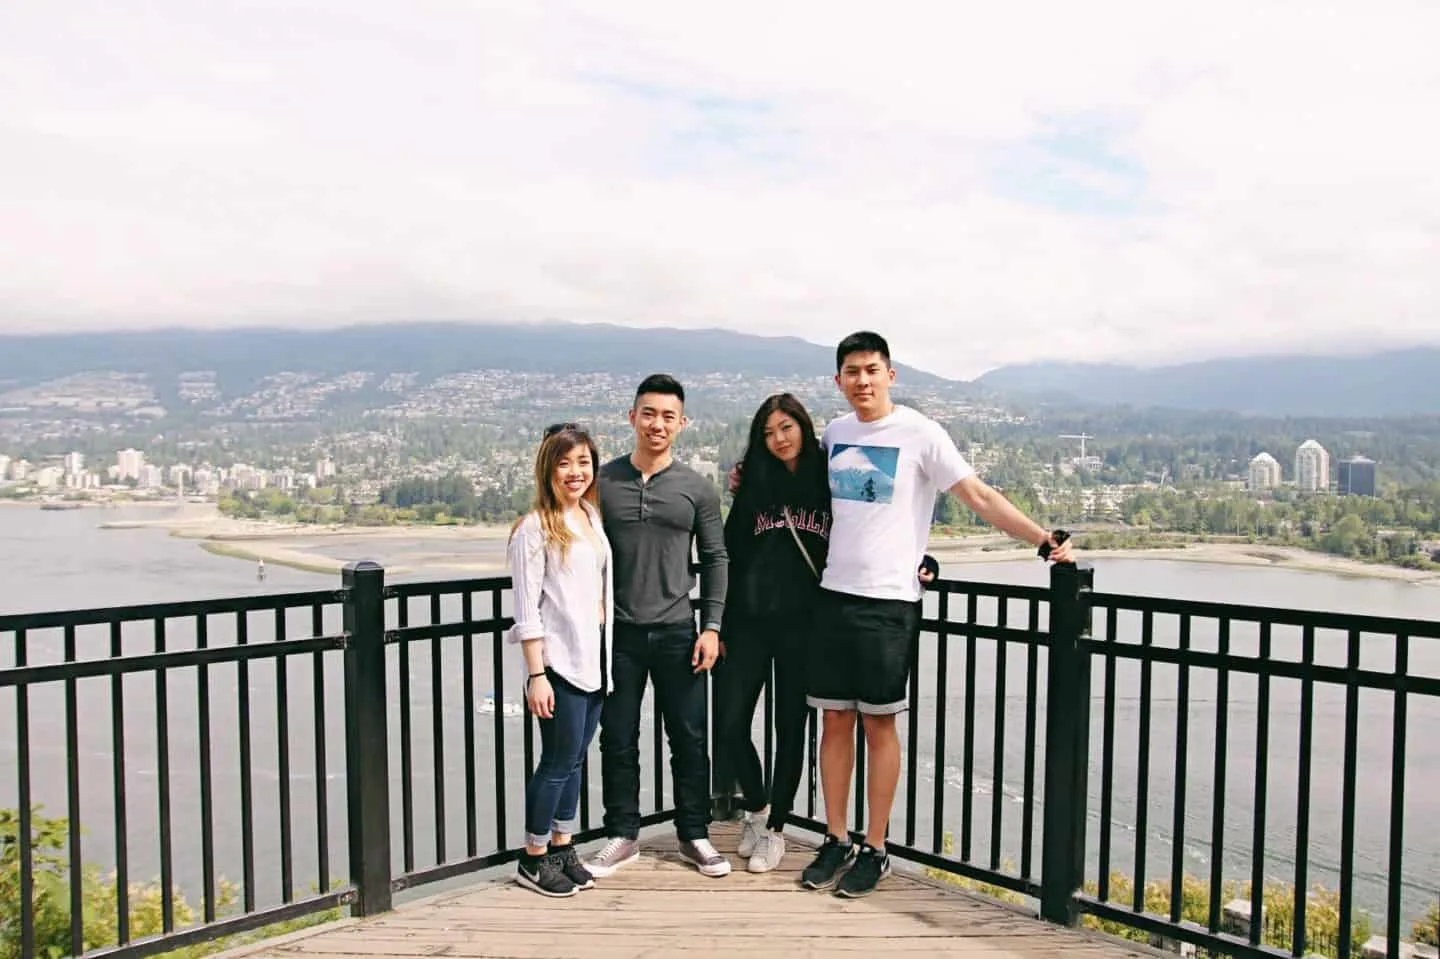 Stanley Park Lookout, Vancouver, British Columbia